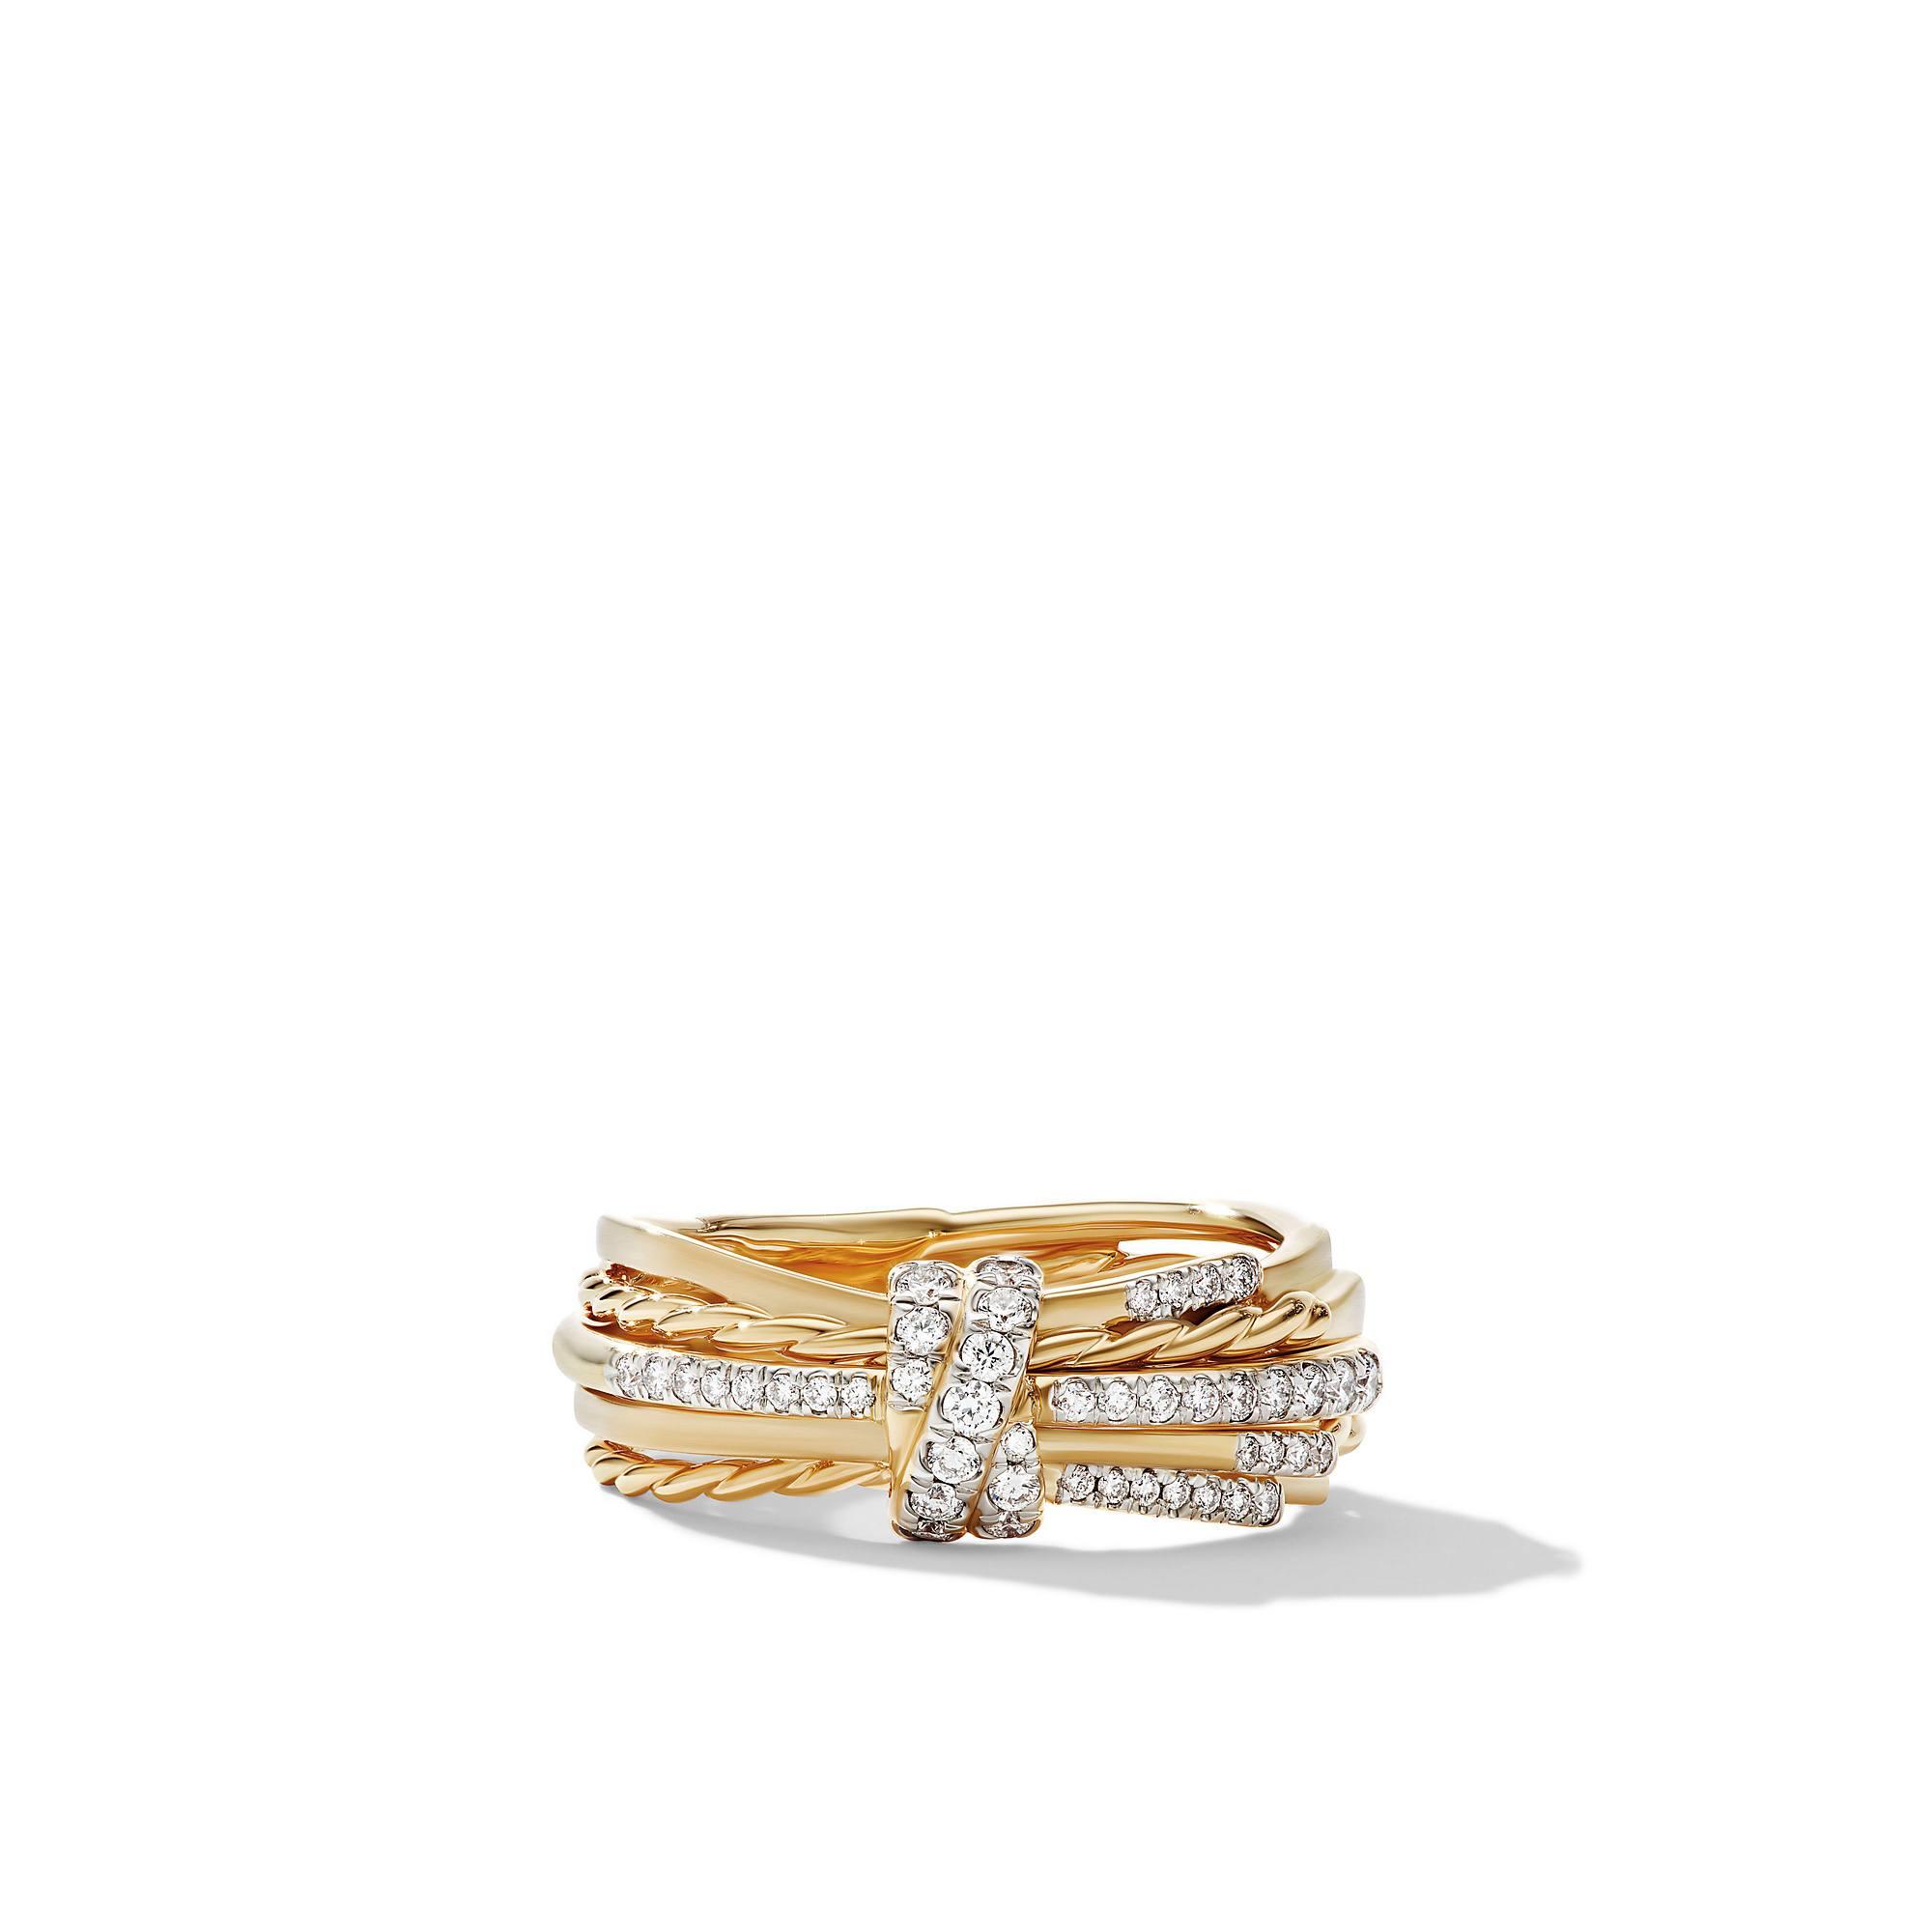 David Yurman Angelika Ring in 18K Yellow Gold with Pave Diamonds, 7.5mm in width, size 7